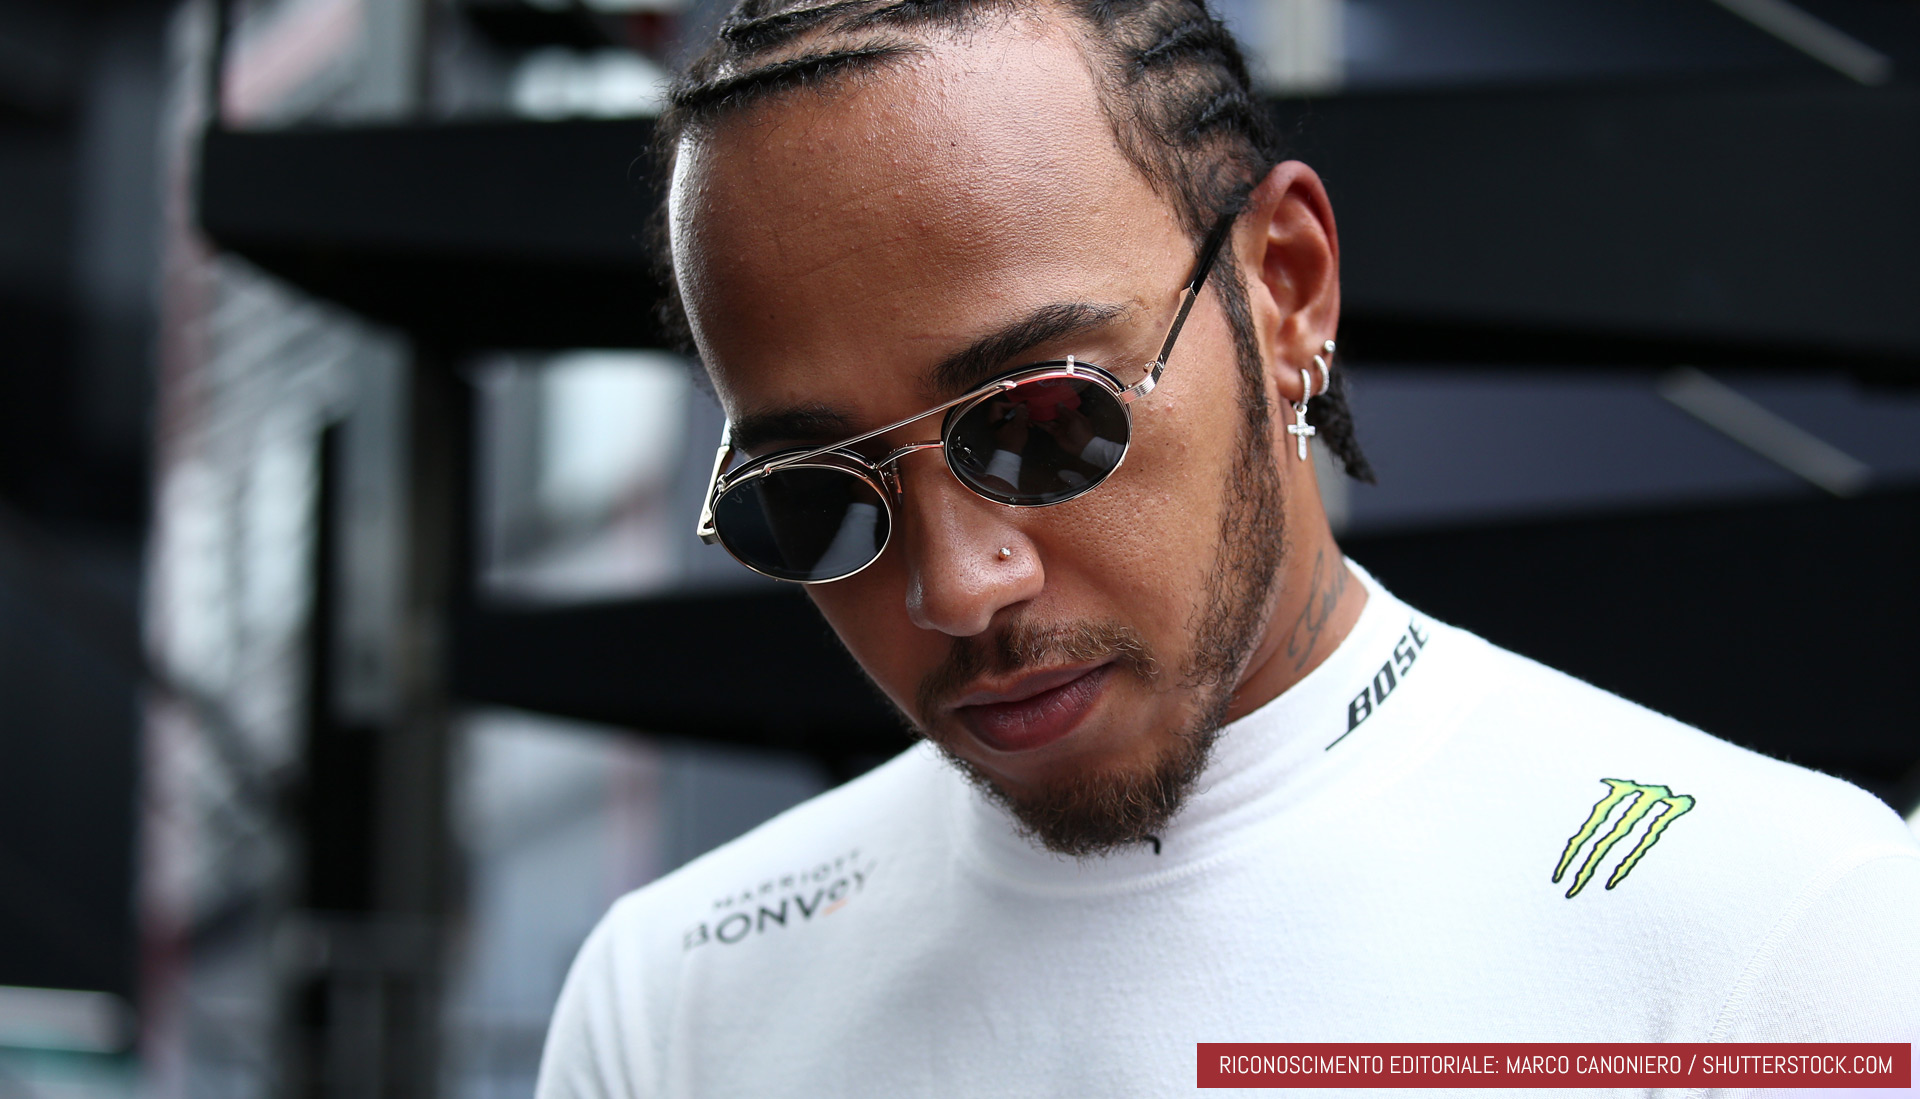 Monza, Italy. 6th September 2019. Formula 1 Gran Prix of Italy. Lewis Hamilton of Mercedes AMG Petronas Motorsport in the paddock during the F1 Grand Prix of Italy